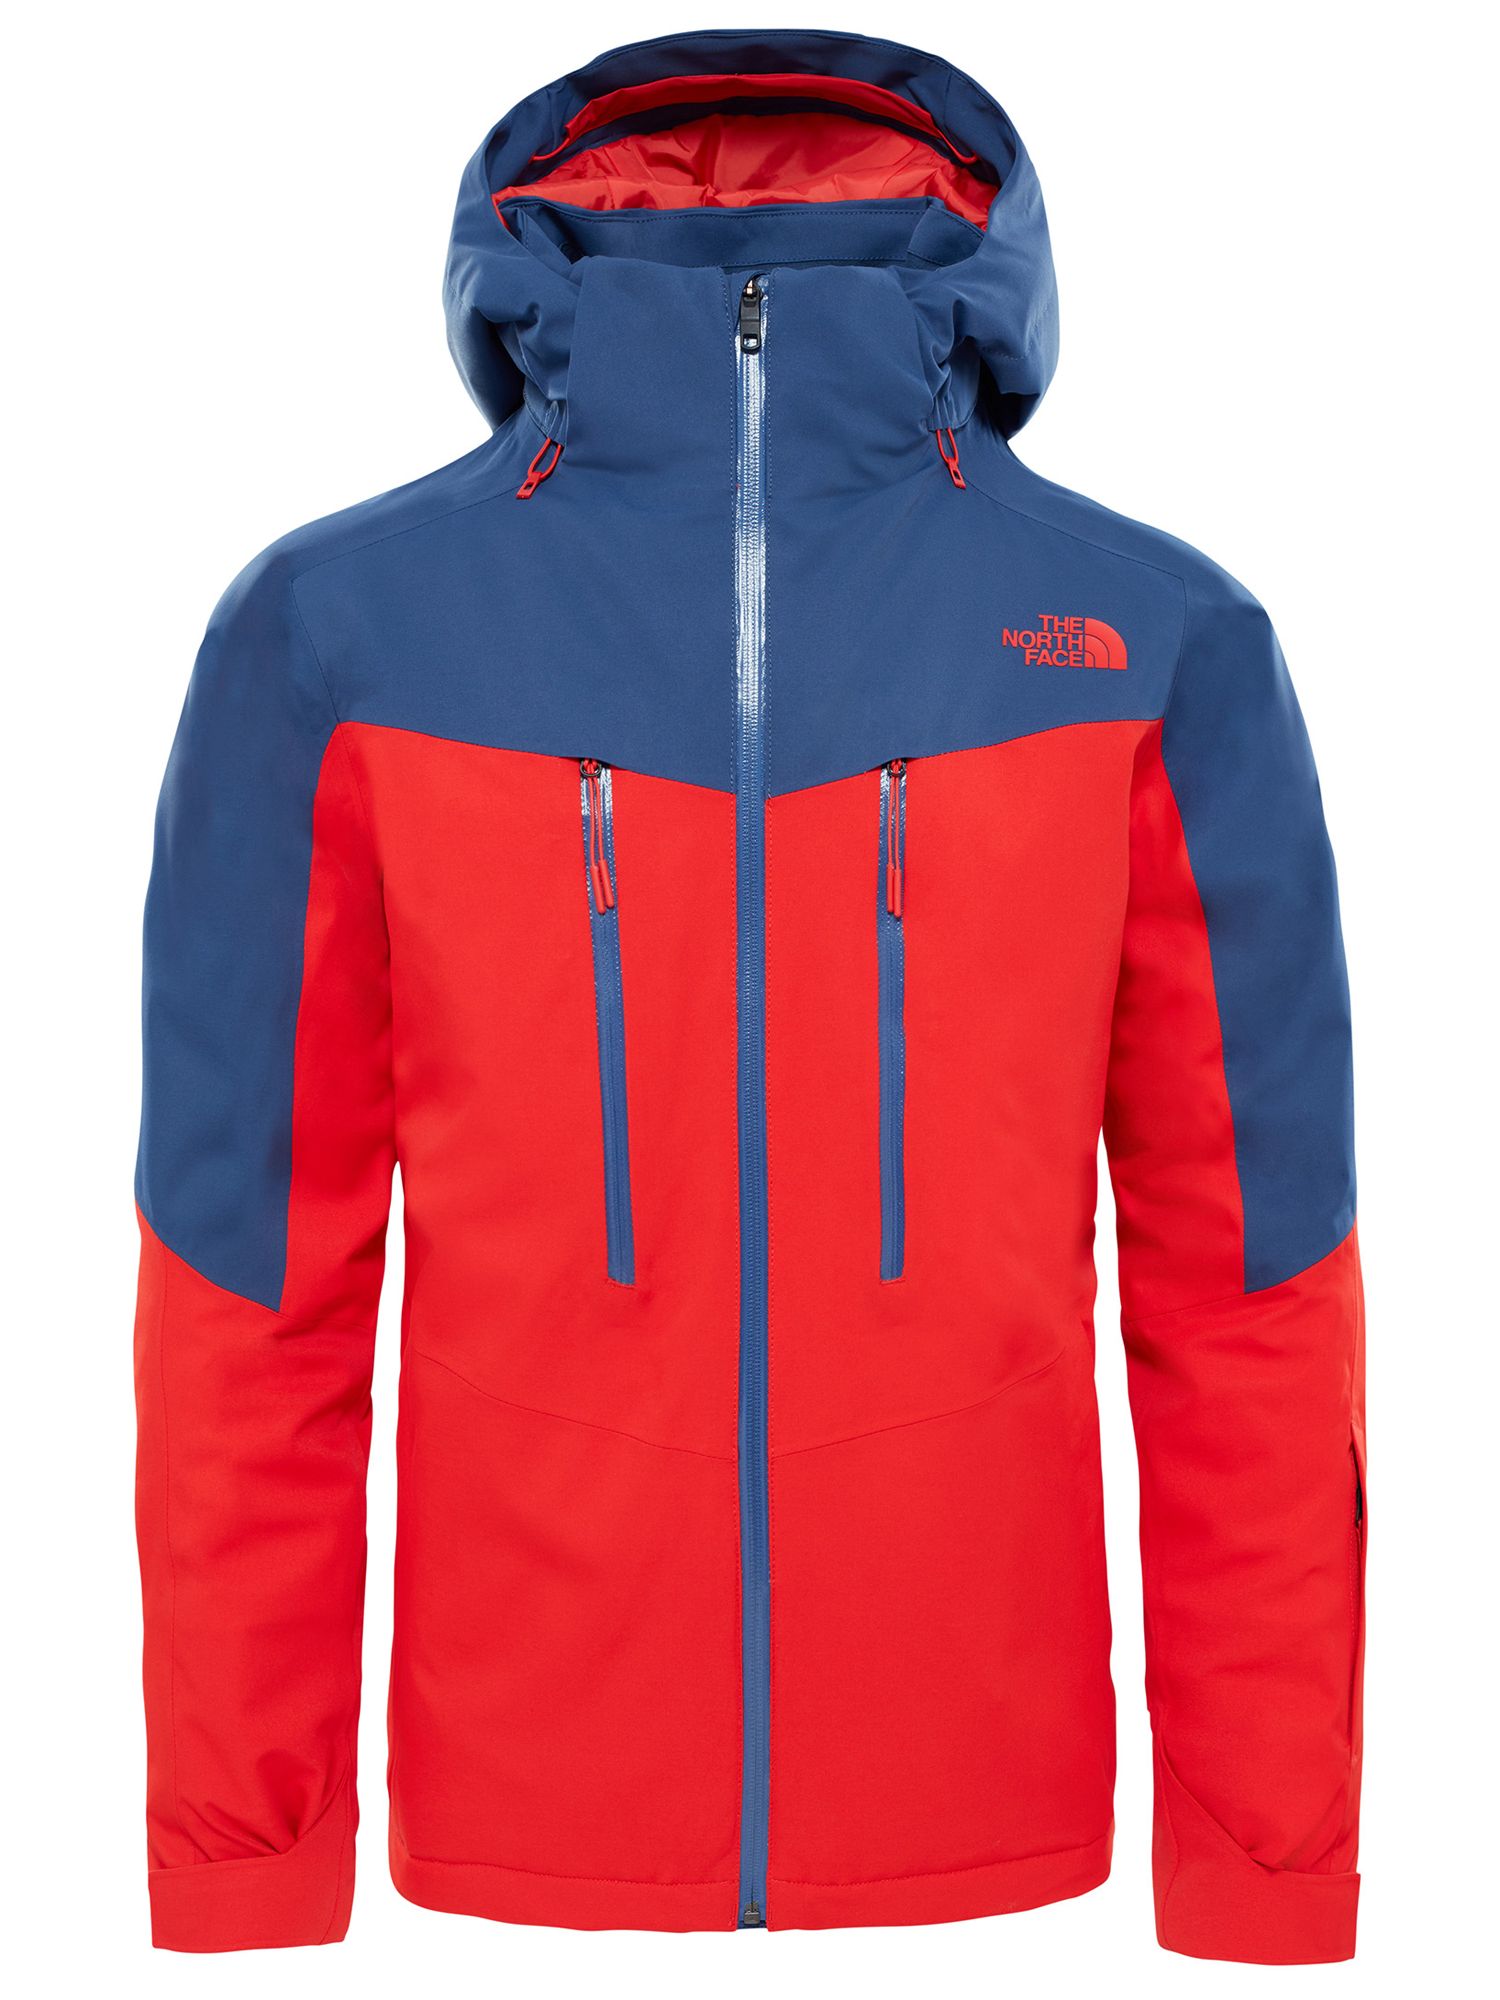 Subscription the are north face ski jackets waterproof westfield crew, Download on the app store, tommy hilfiger t shirt white womens. 